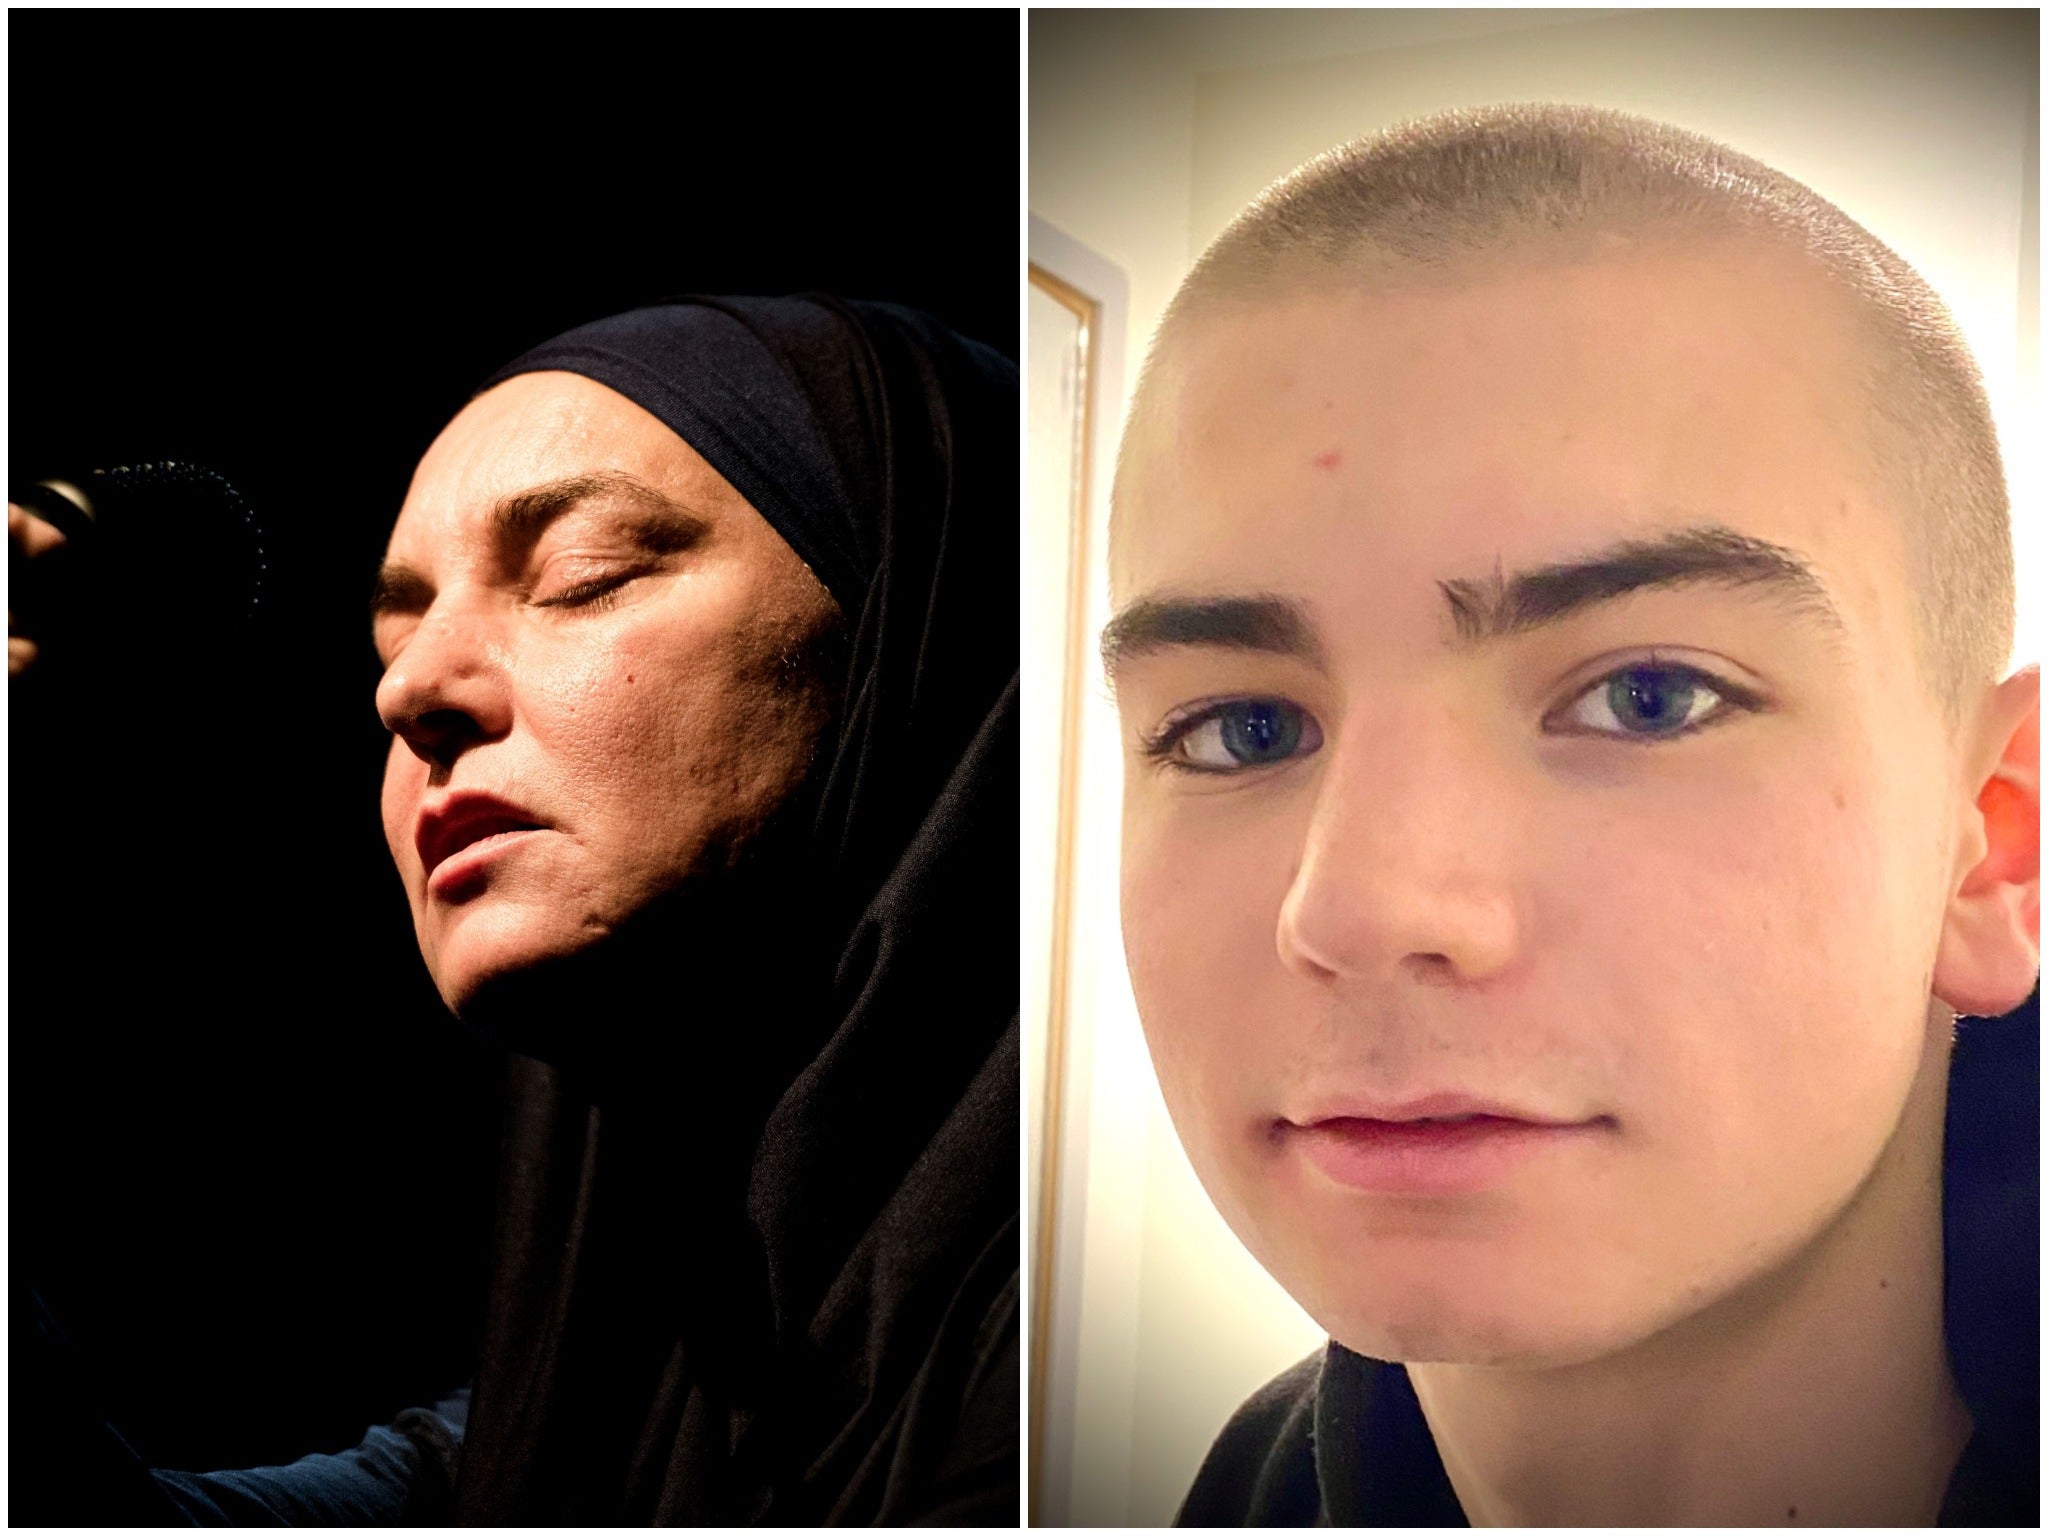 Sinead O’Connor and her son, Shane